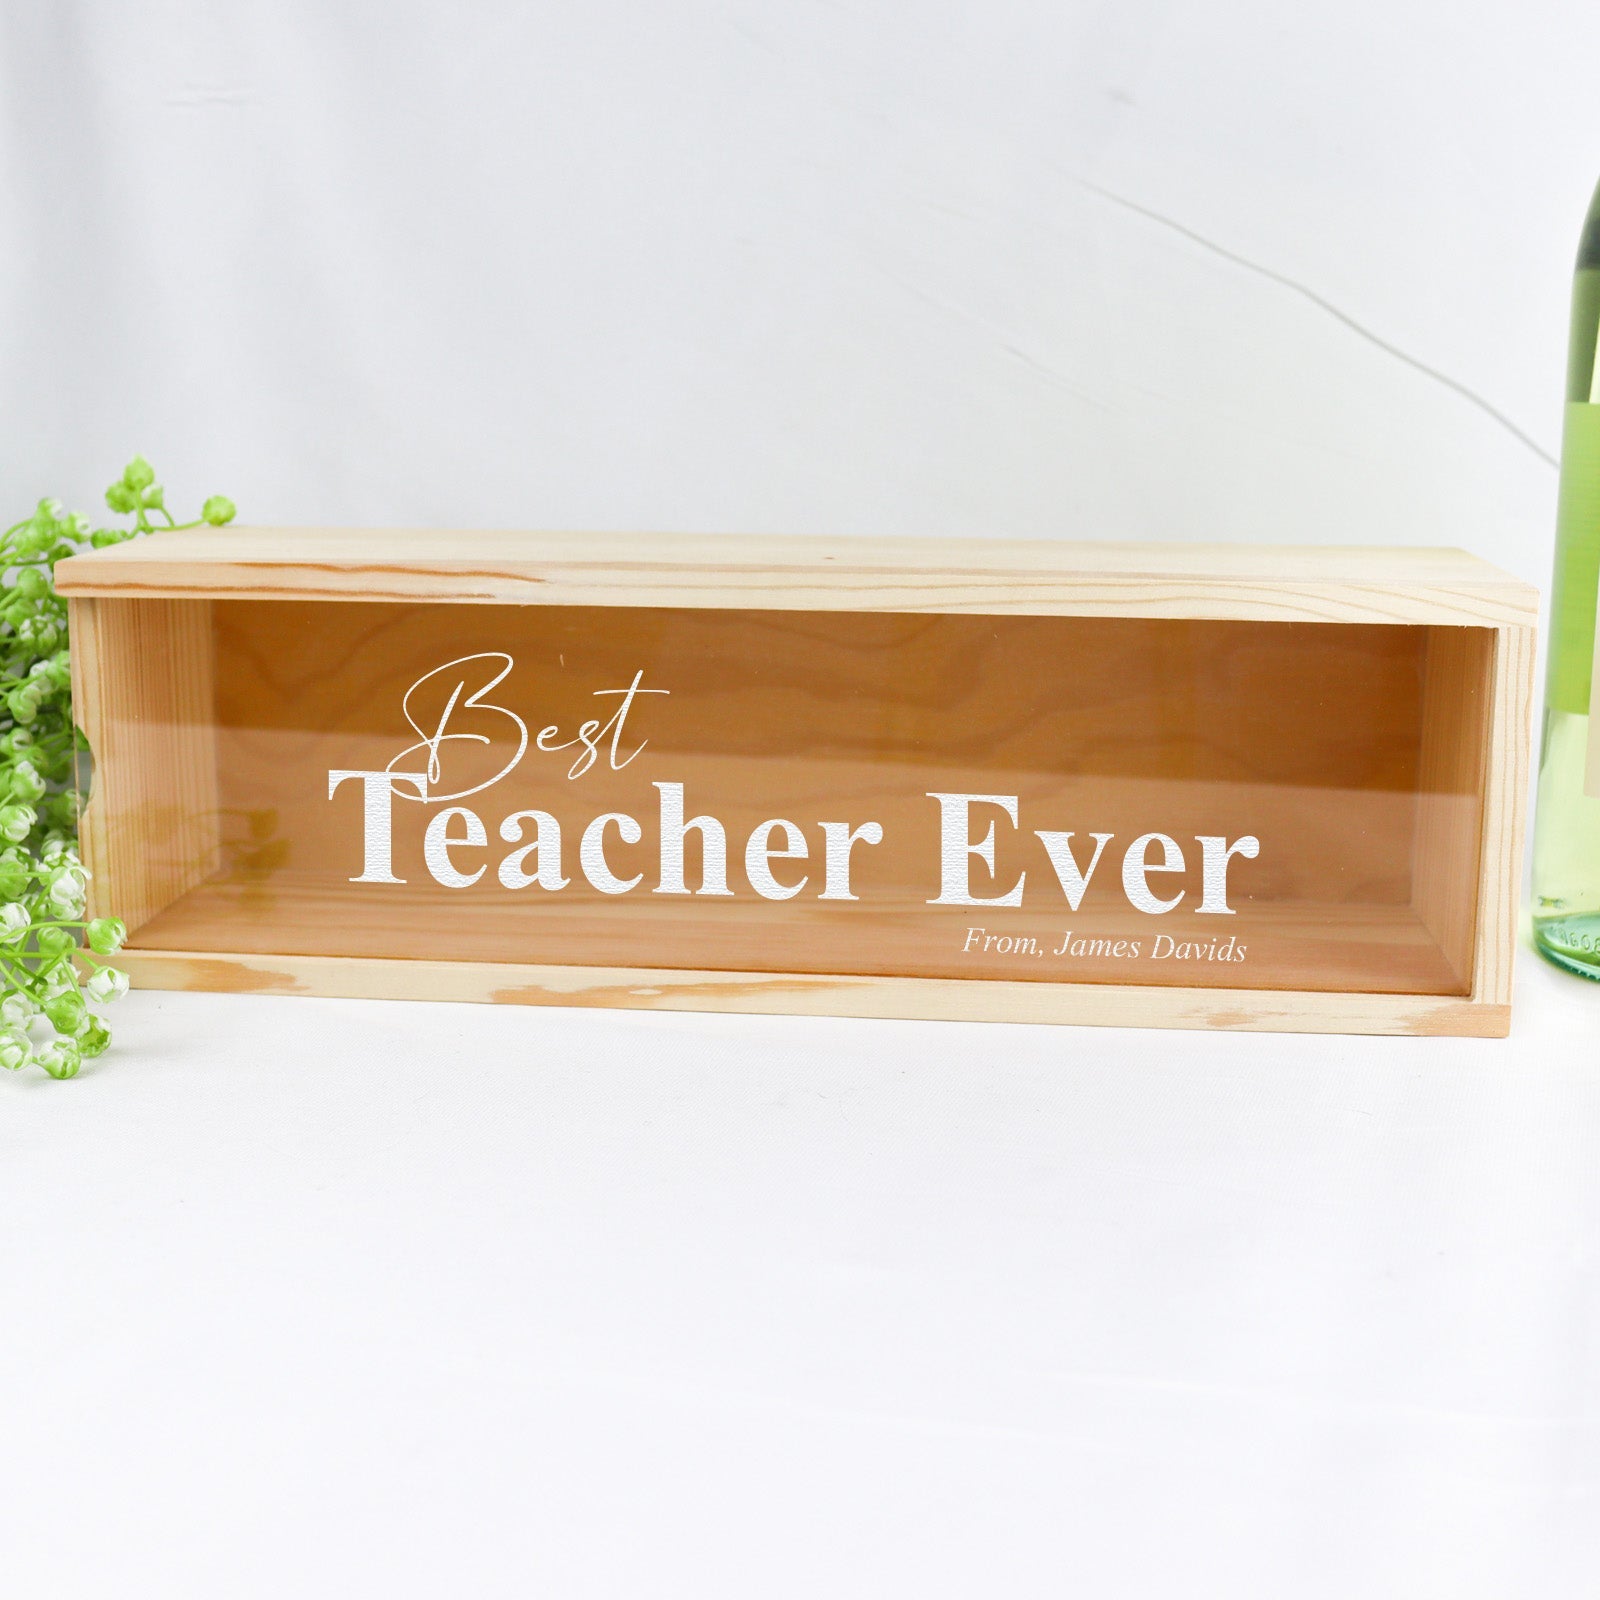 Best Teacher Ever Wooden Wine and Champagne Box - CustomKings - 